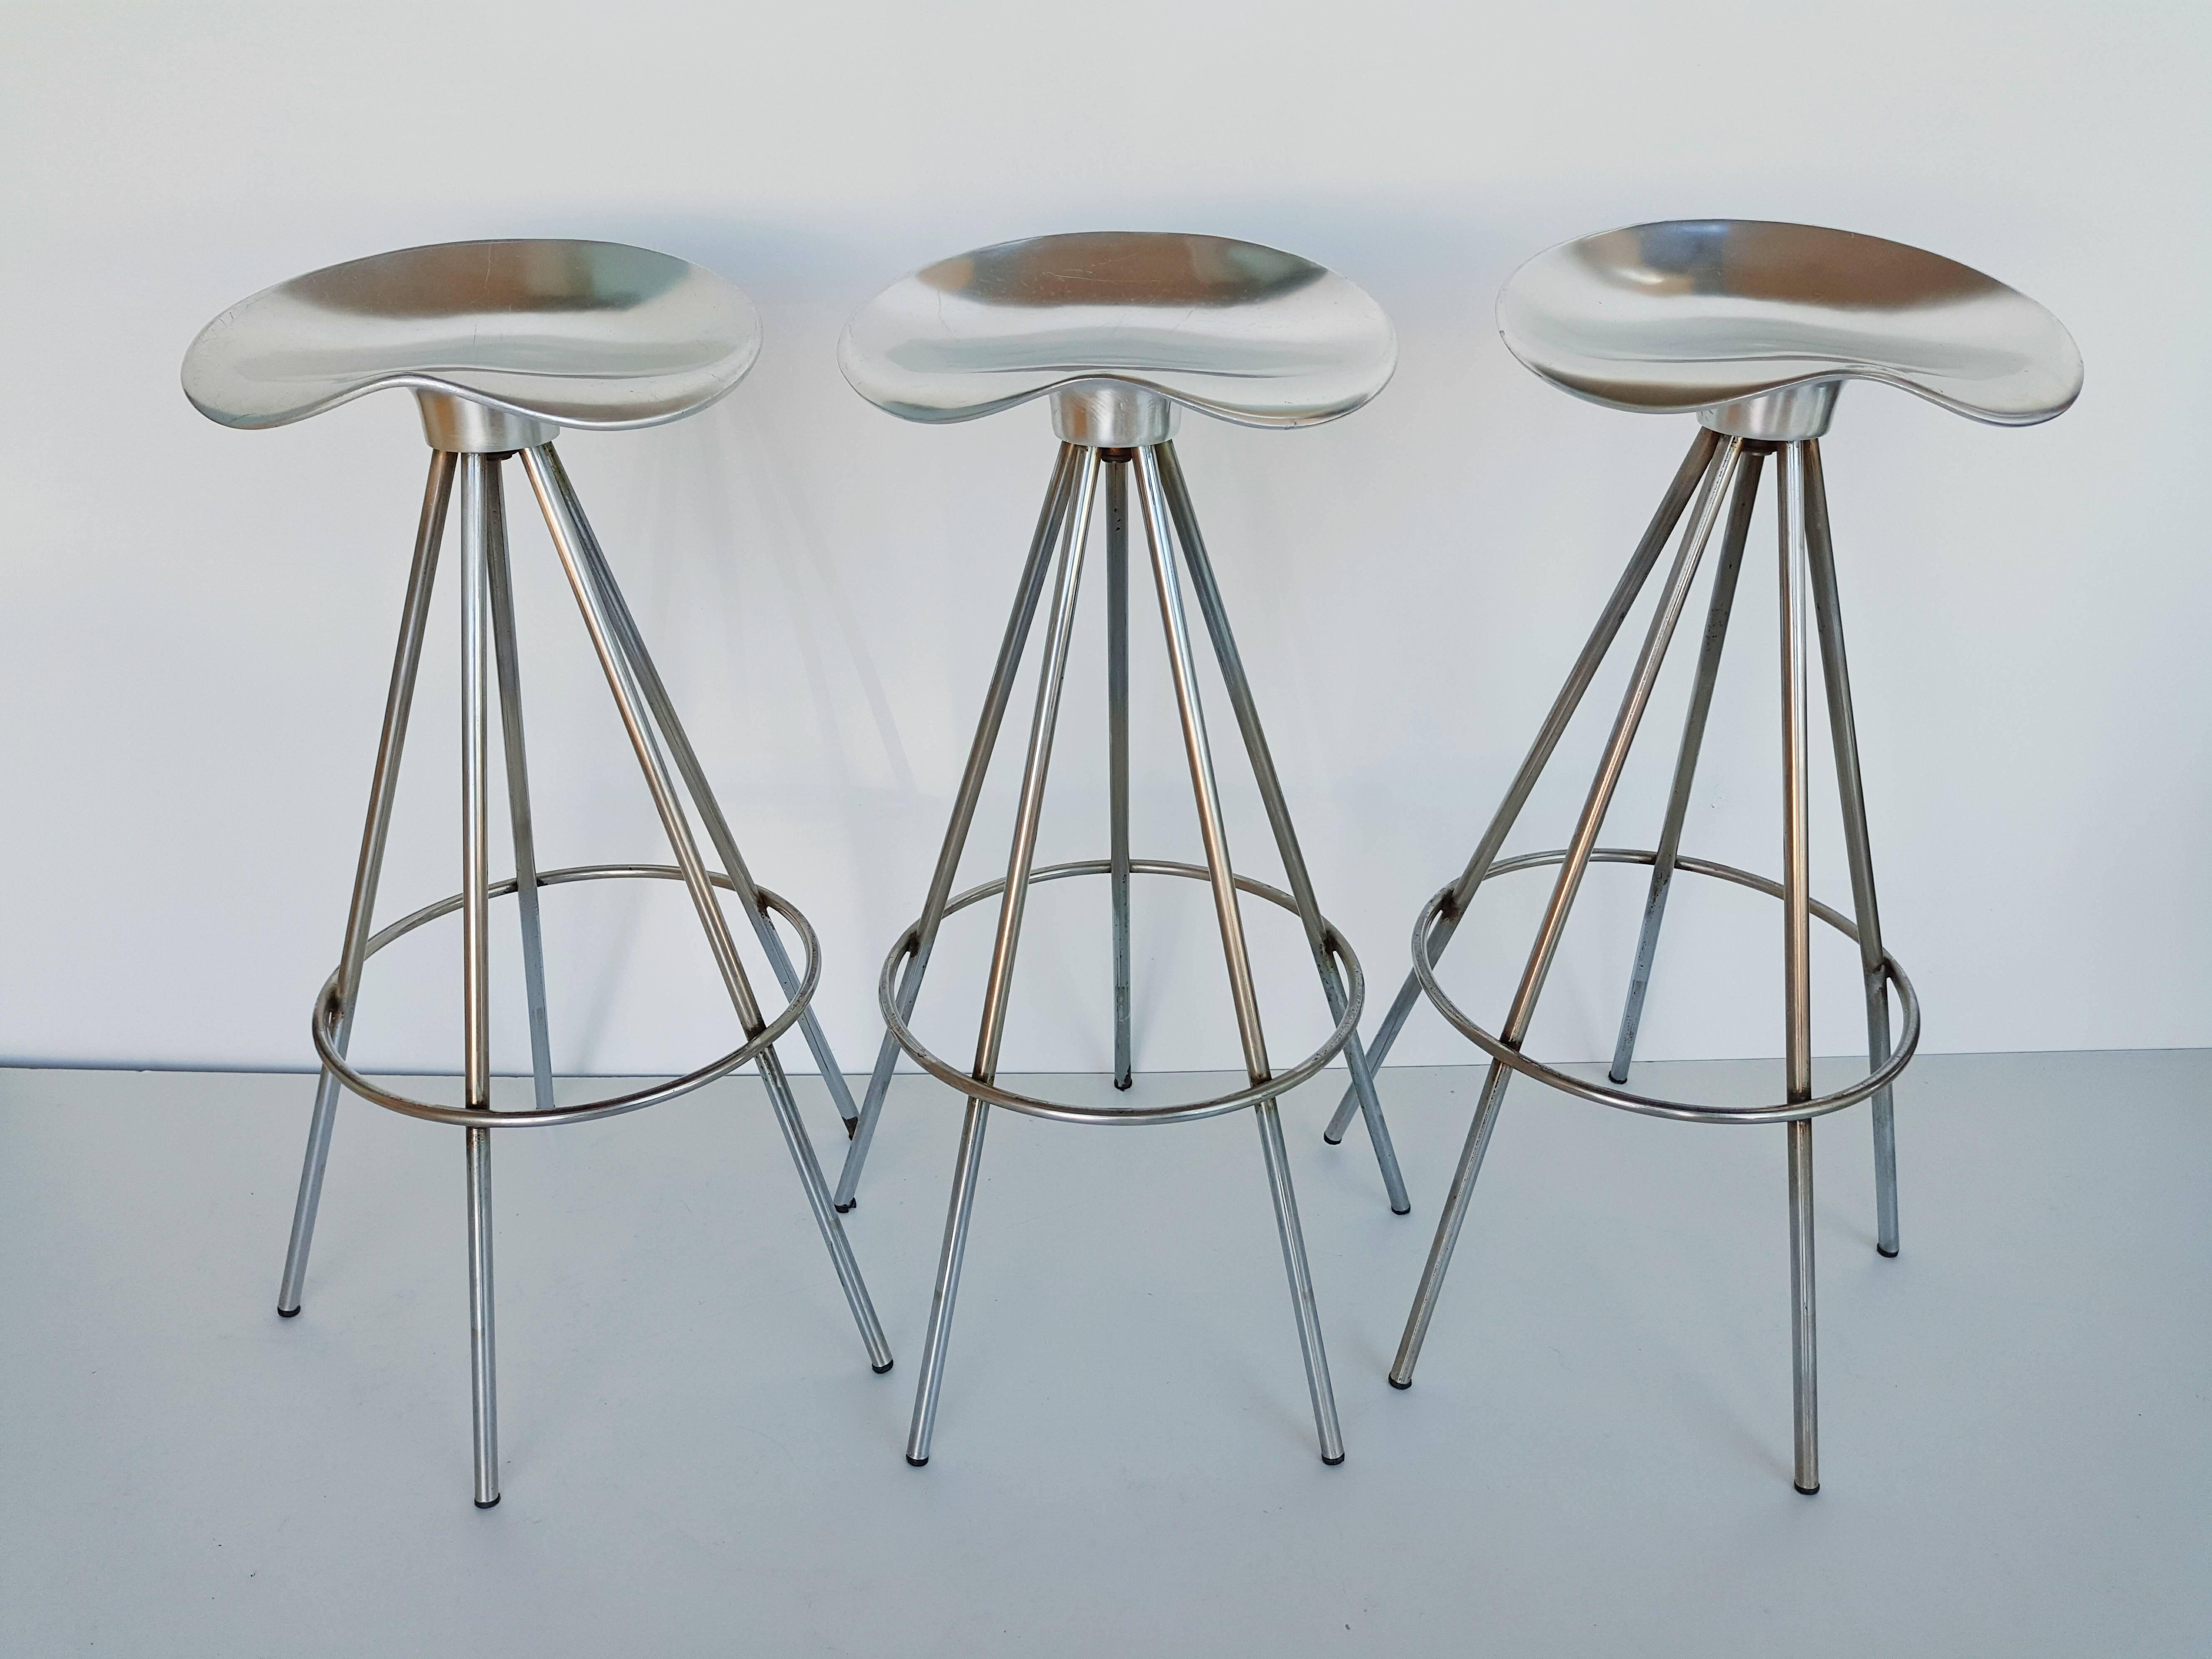 Set of three first edition bar stools designed by Pepe Cortes and made in Spain by Amat-3 for Knoll. Aluminum saddle-like seats which swivel and chrome frames. In very good vintage condition. 
Seat dimensions (cm): 36 x 34. Two set of three